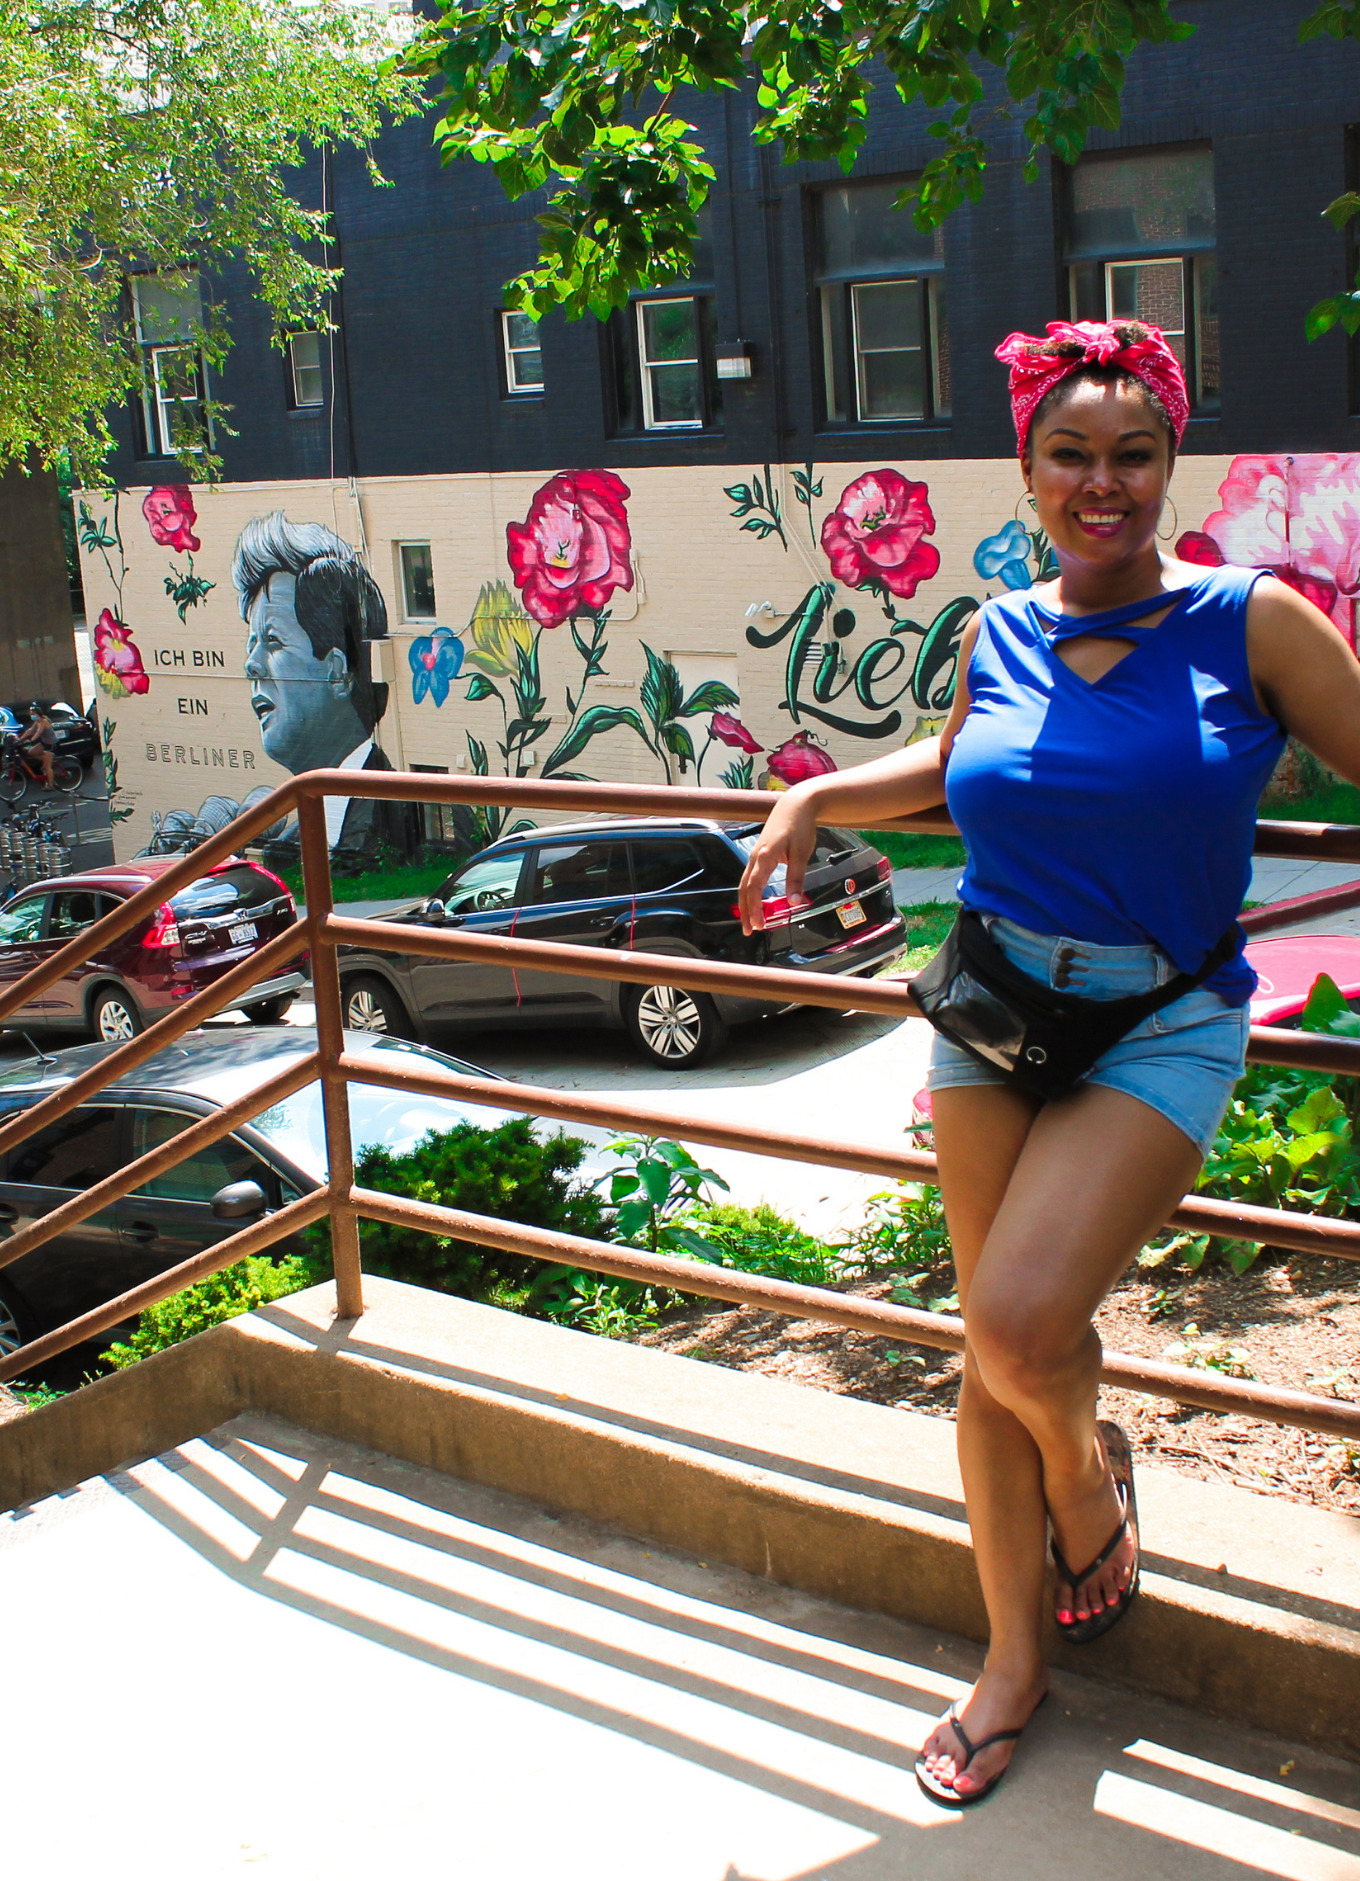 Blogger Rogan Smith wears a red bandana and a blue shirt. She poses against a rail with a mural of John F Kennedy in the background